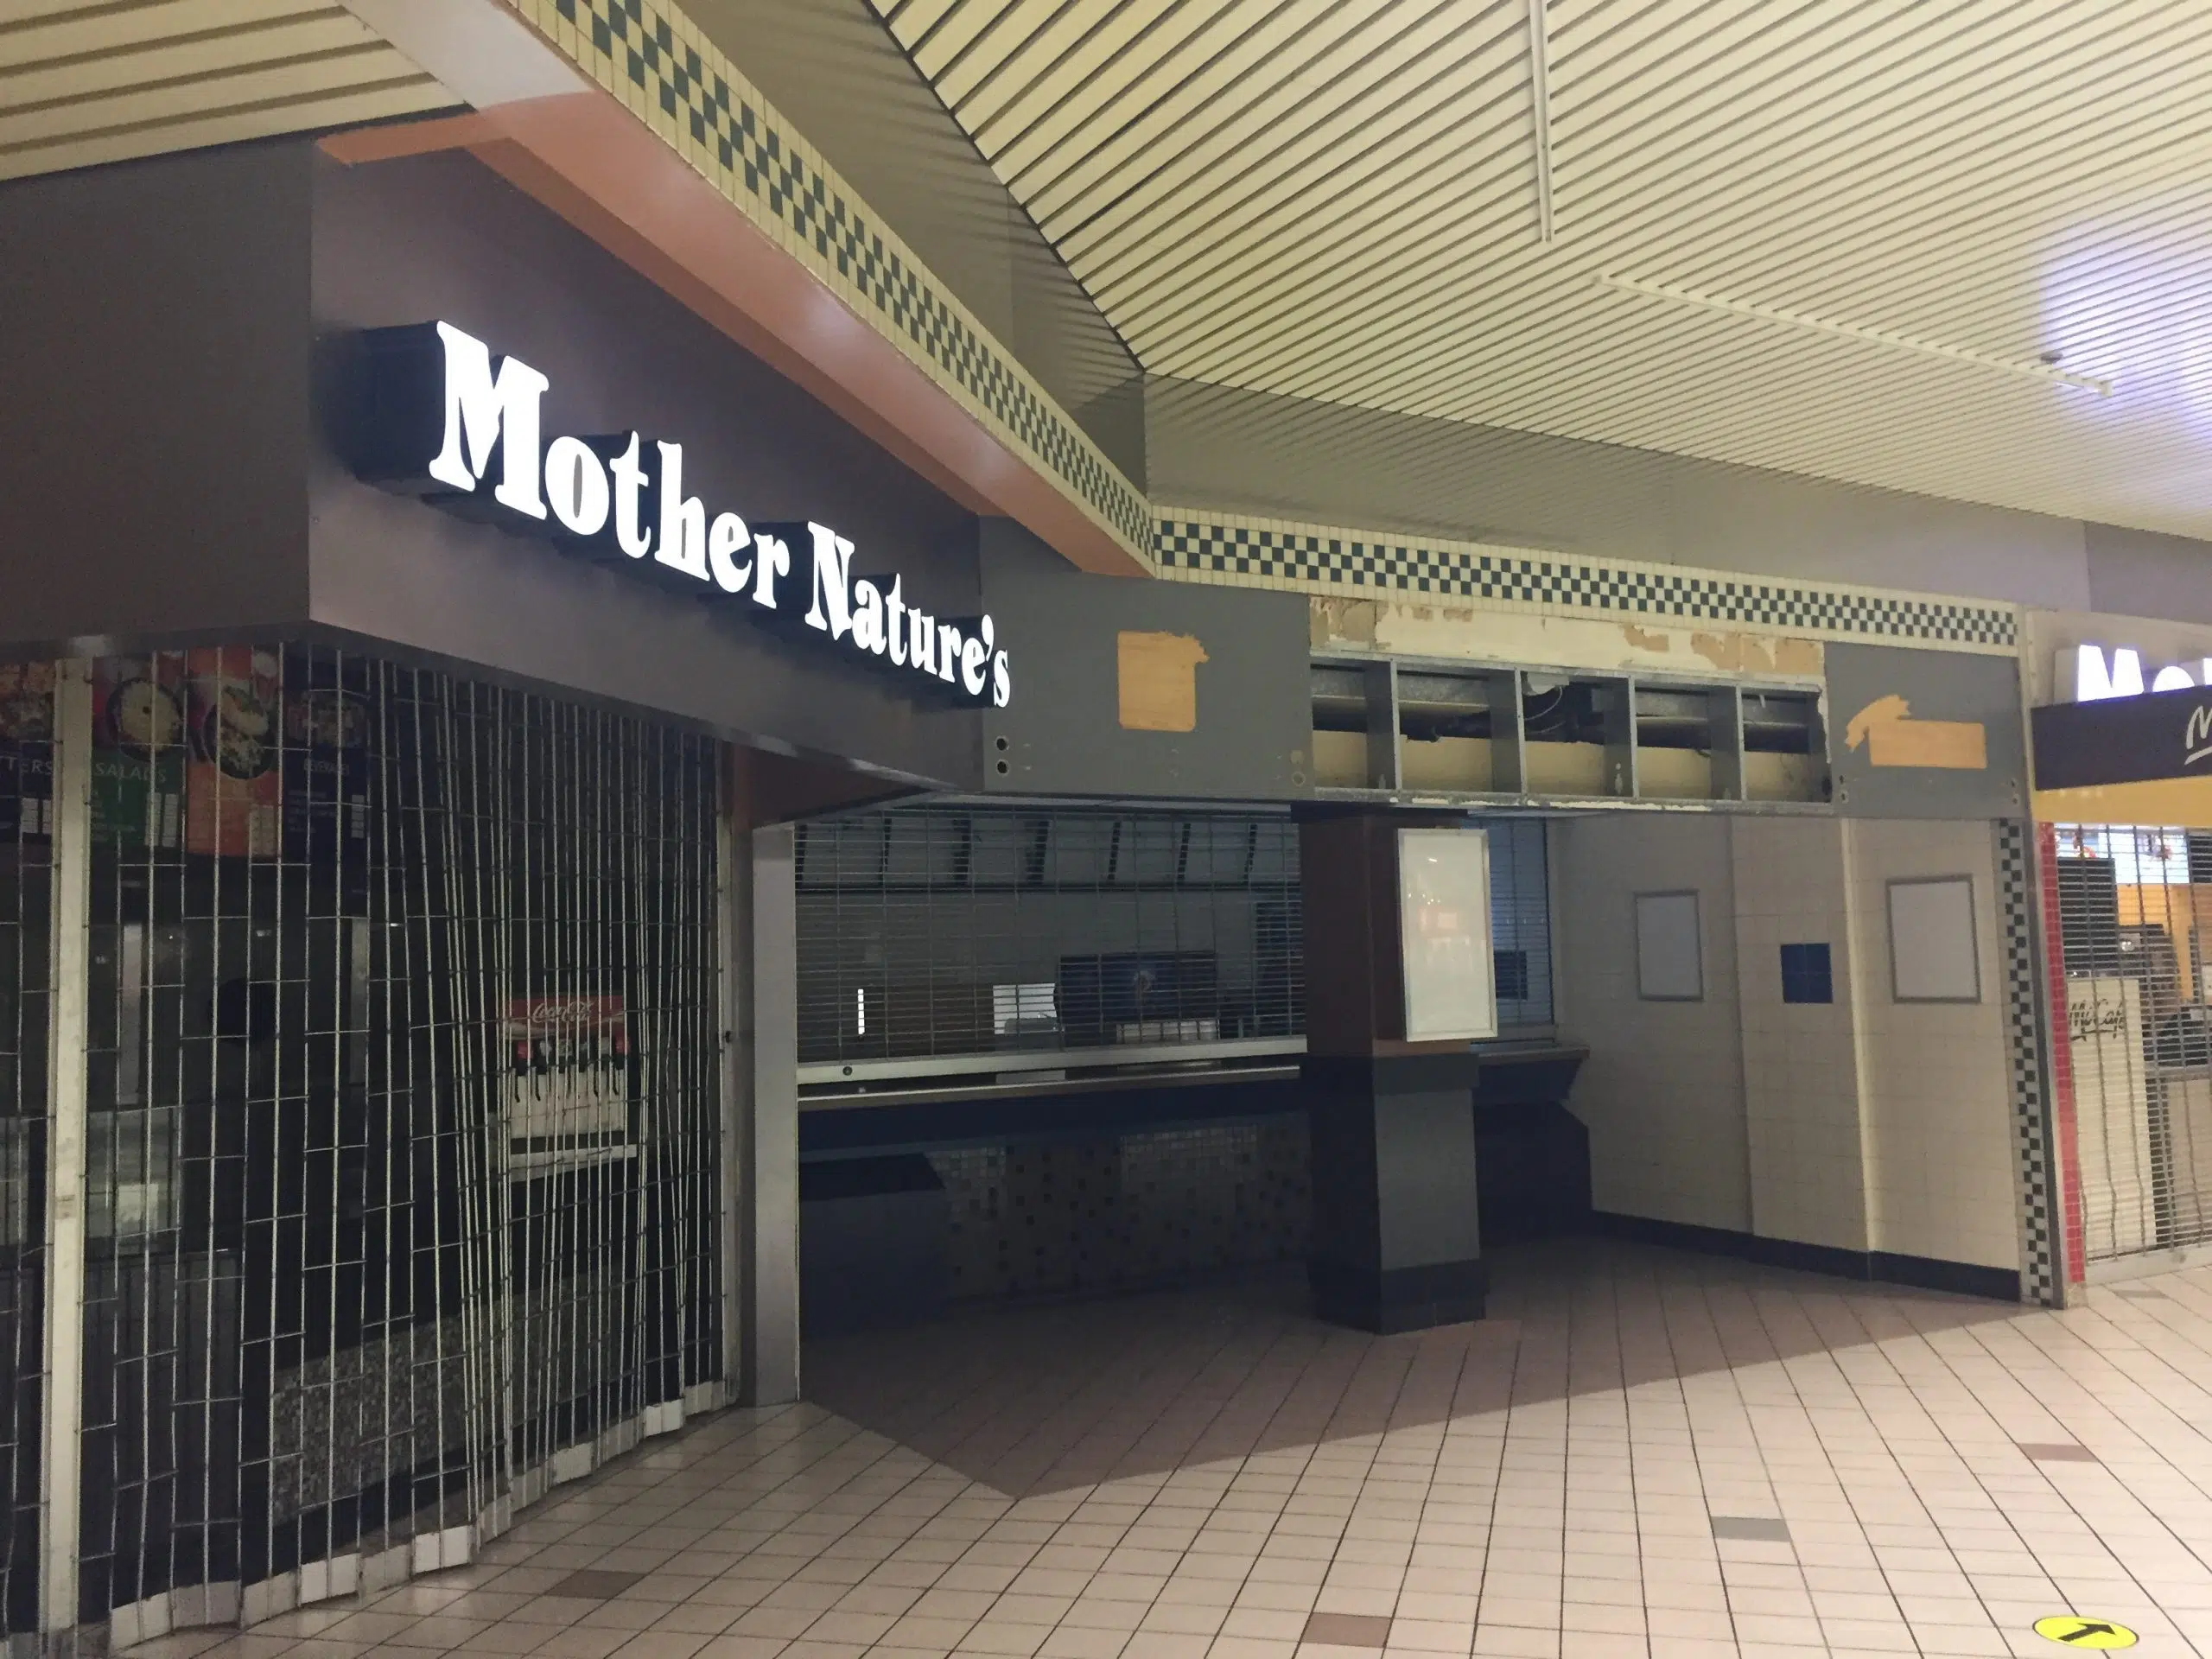 Mall Eatery Closes For Good